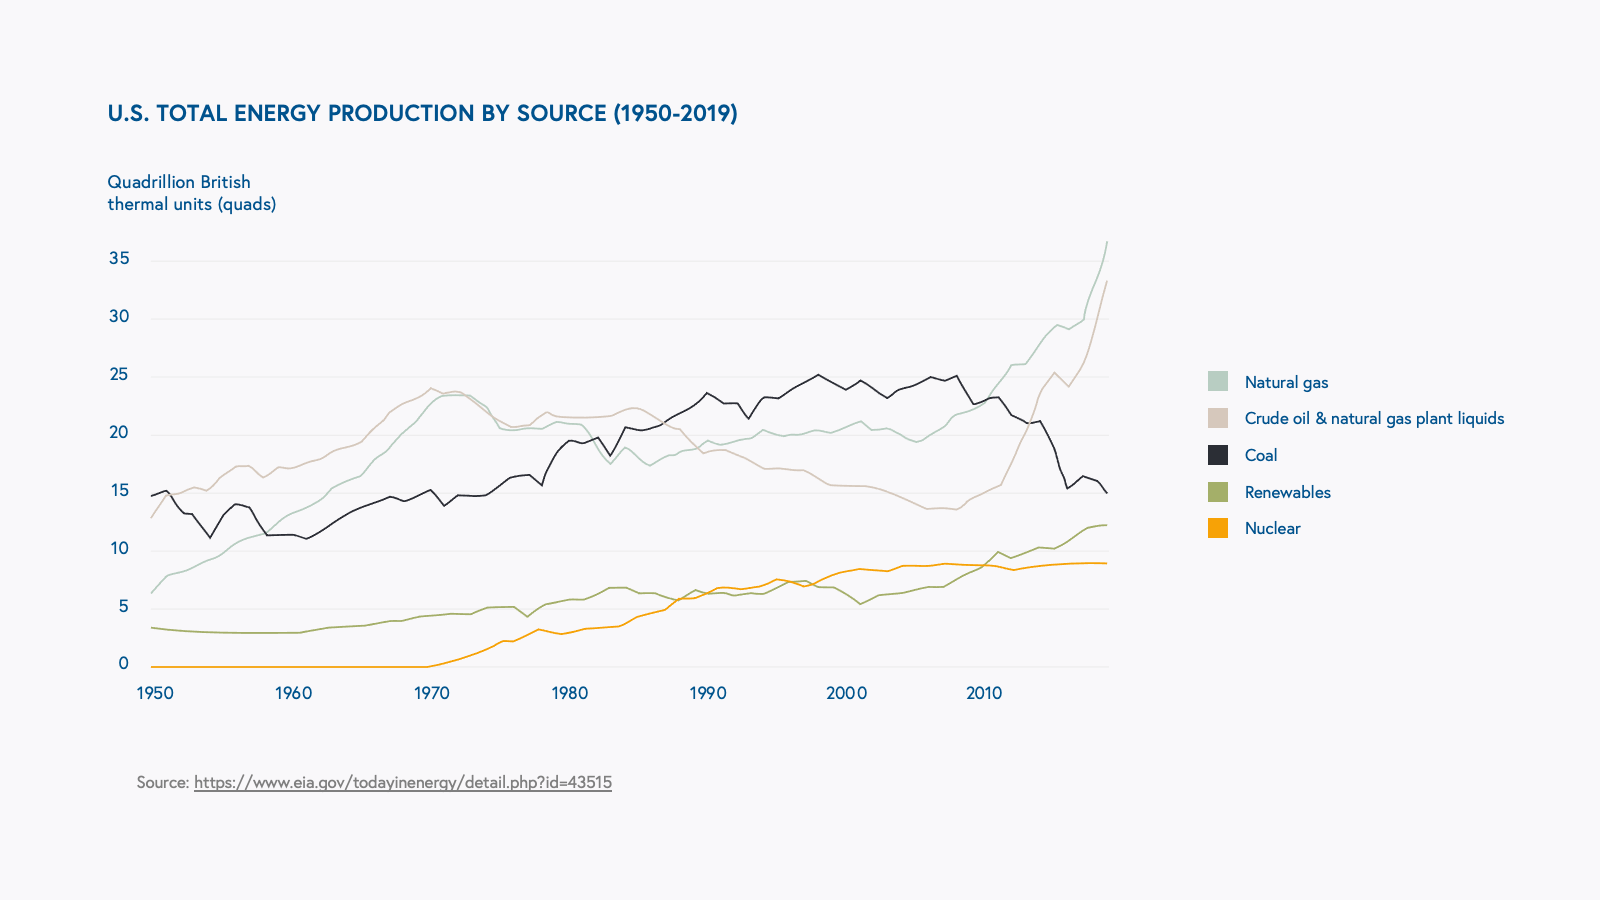 U.S. TOTAL ENERGY PRODUCTION BY SOURCE (1950-2019)